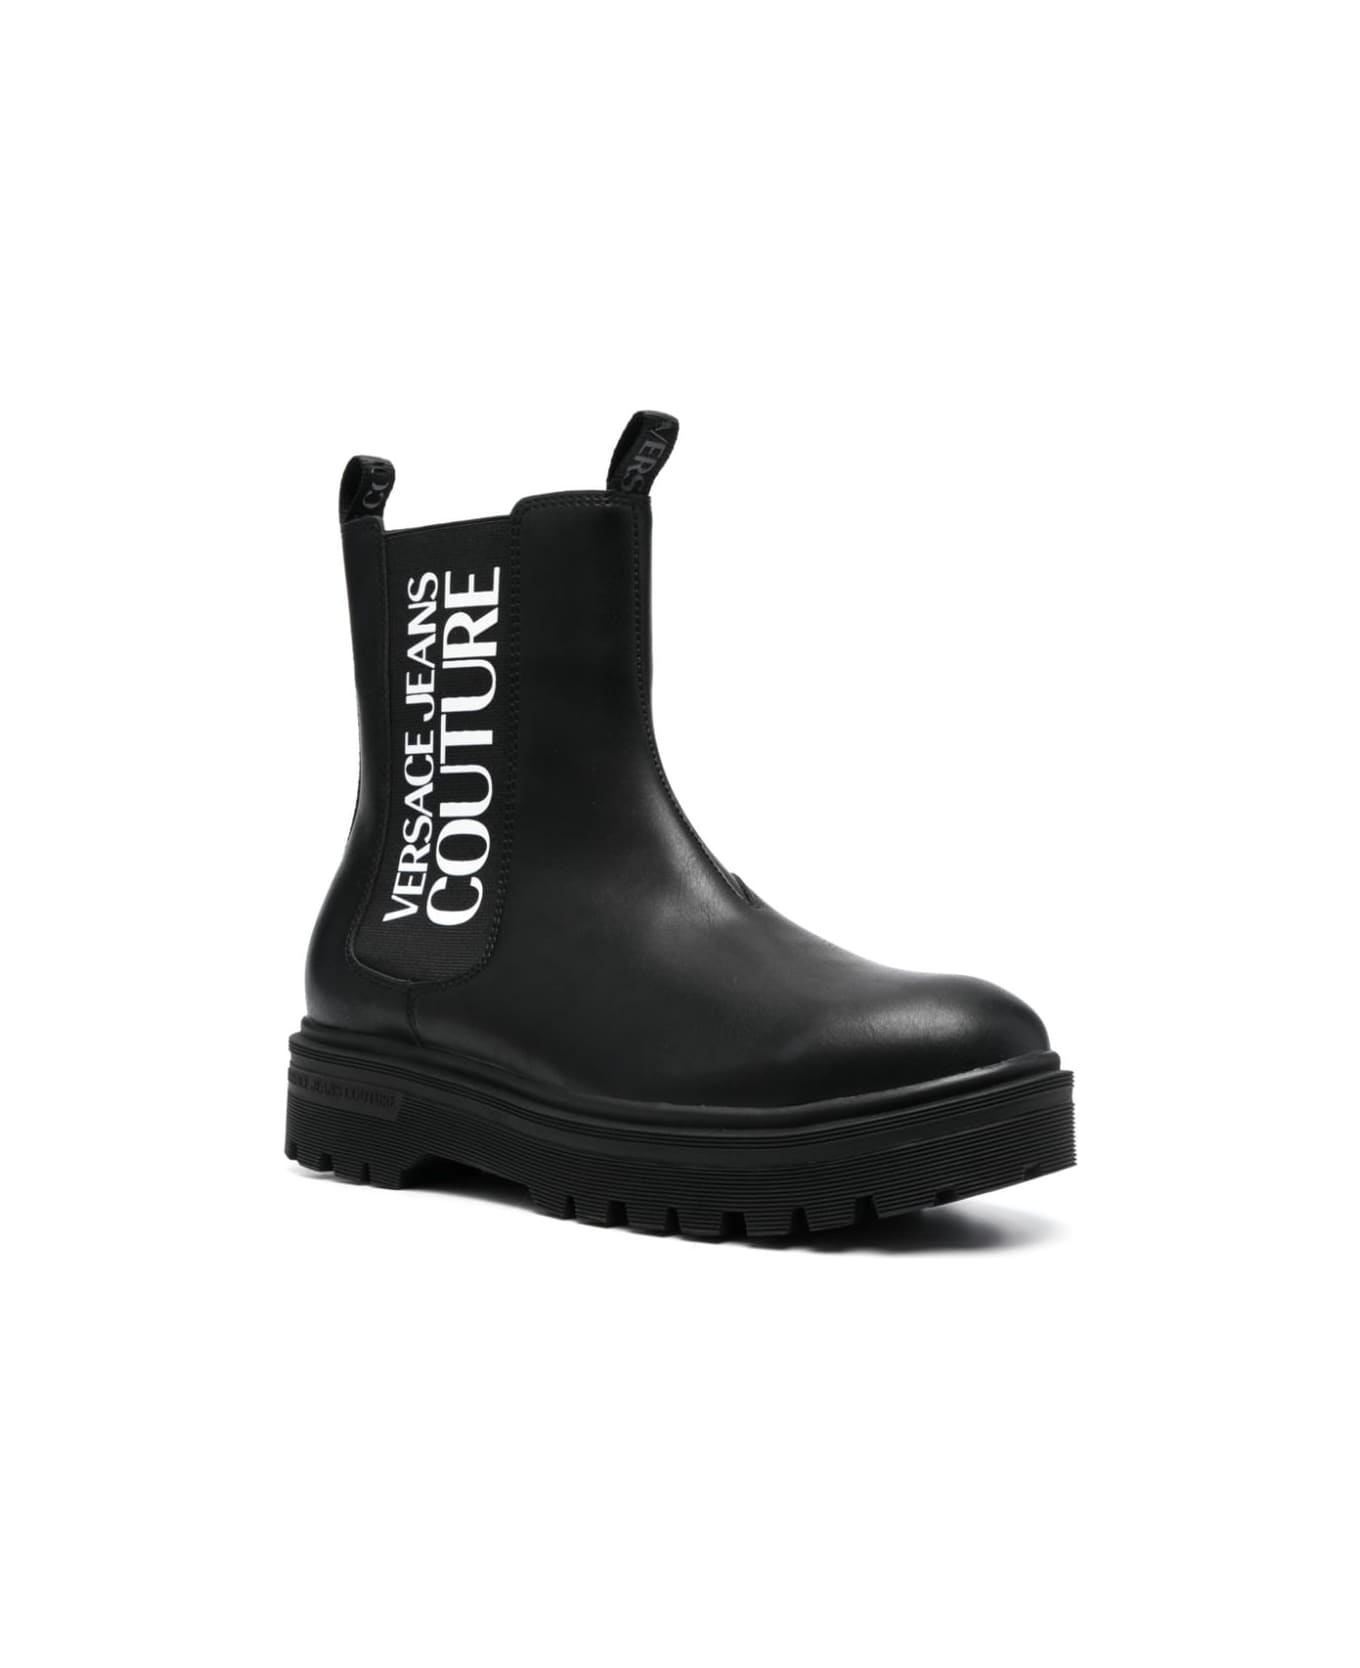 Versace Jeans Couture Syrius Dis47 Boots - Black